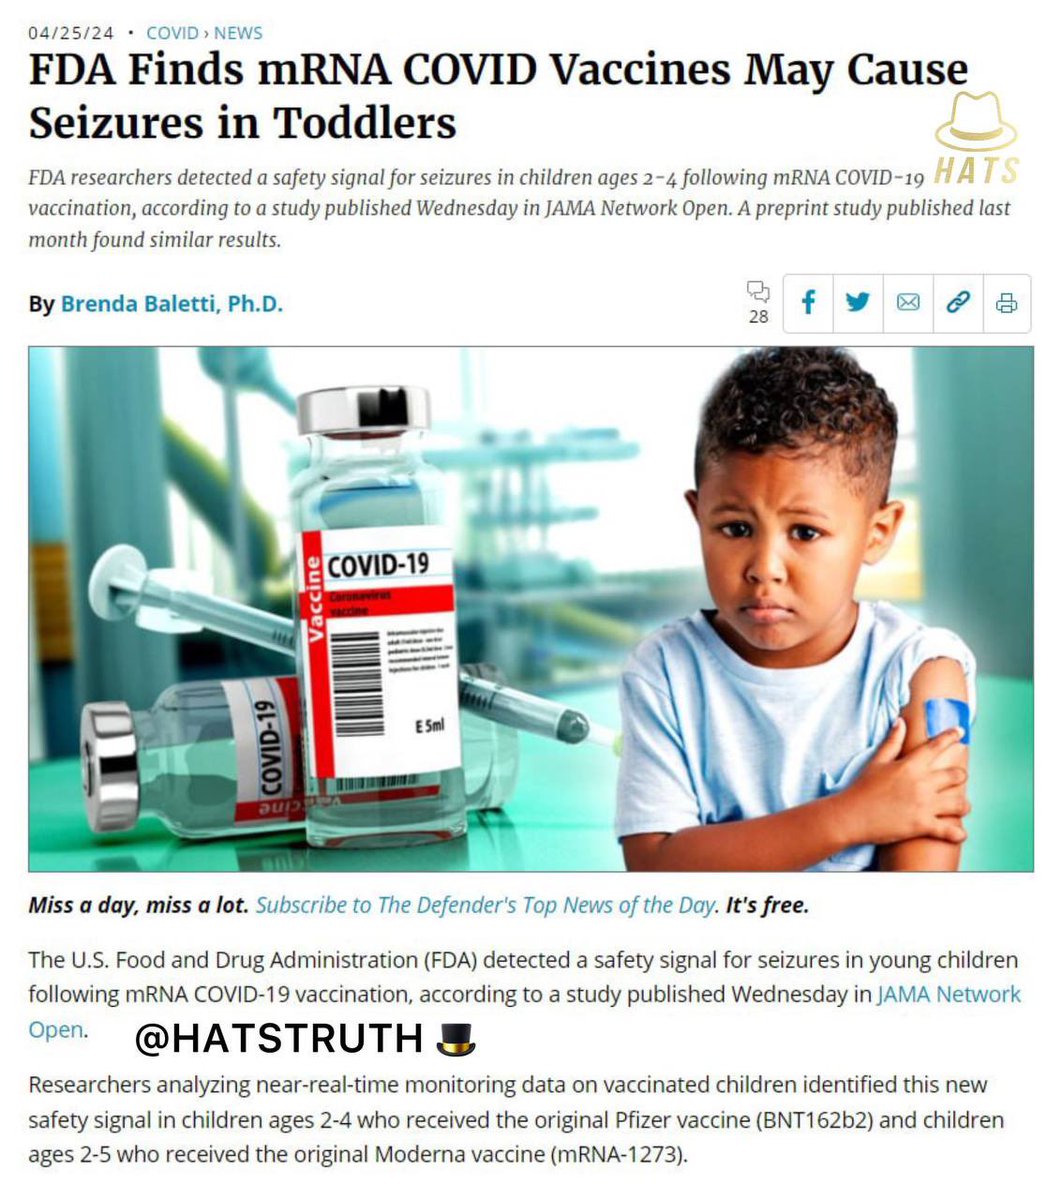 The U.S. FDA detected a safety signal for seizures in young children following mRNA Covid-19 vaccination, according to a study published Wednesday.

Researchers also identified a safety signal for myocarditis or pericarditis following the Pfizer vaccine in adolescents aged 12-17.